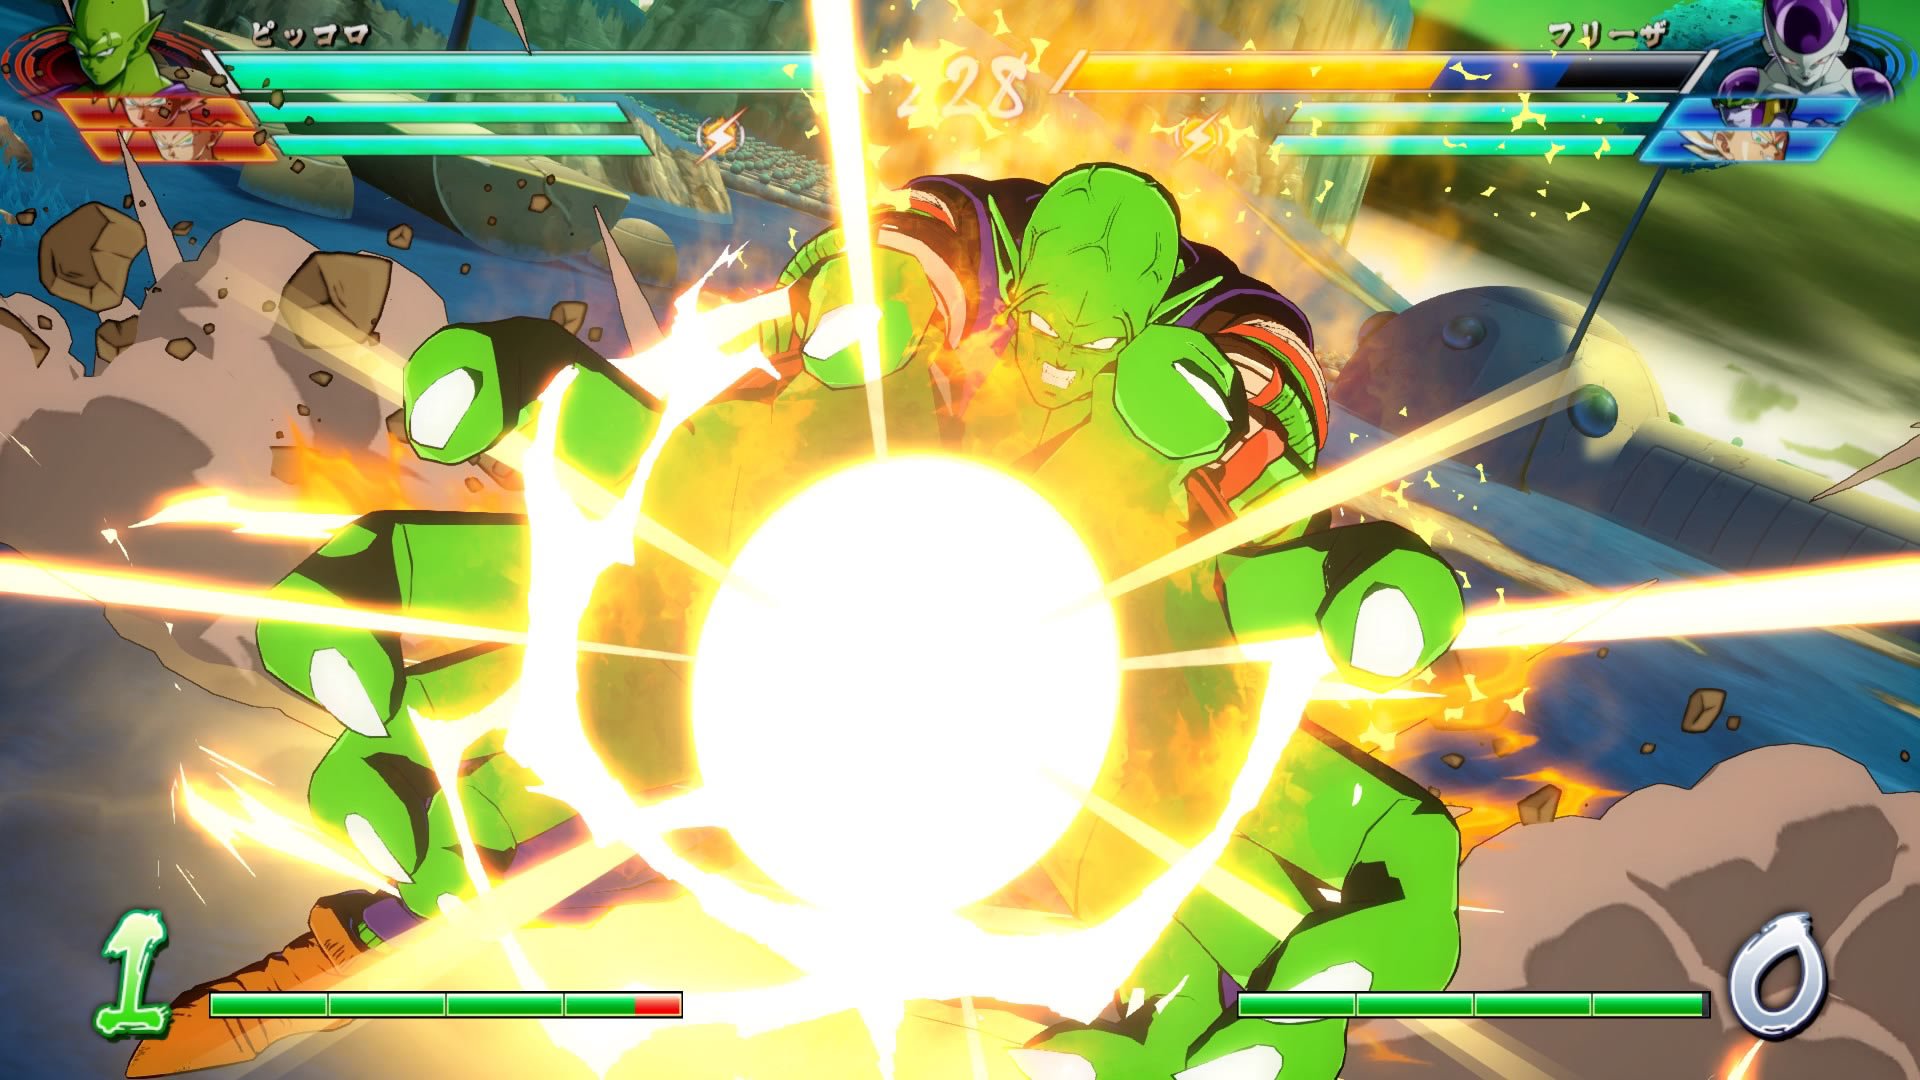 Dragon Ball FighterZ Denuvo DRM has been cracked